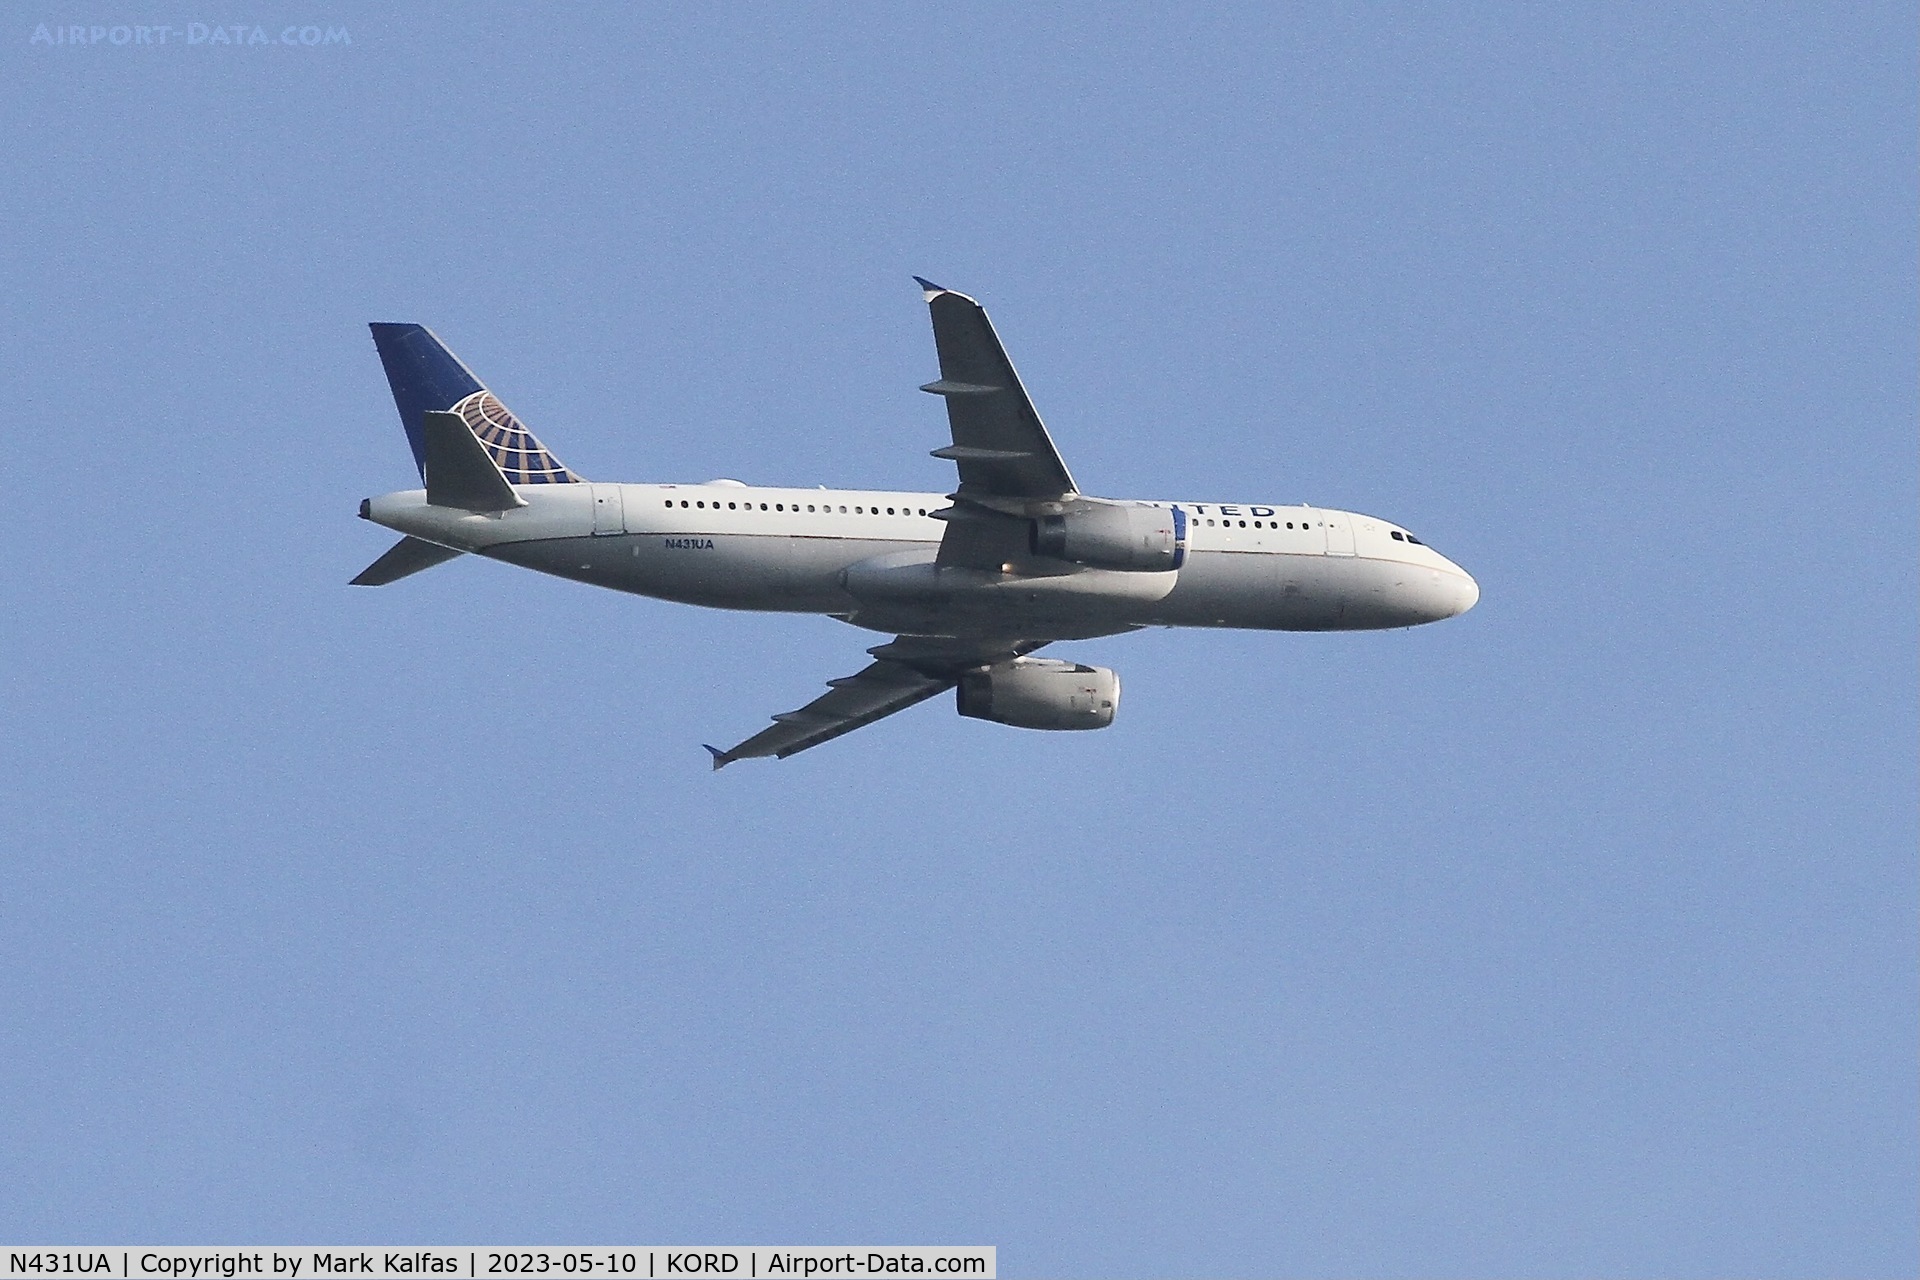 N431UA, 1996 Airbus A320-232 C/N 571, United Airlines Airbus A320-232, N431UA operating as UA2362 from MIA-ORD, on approach into O'Hare